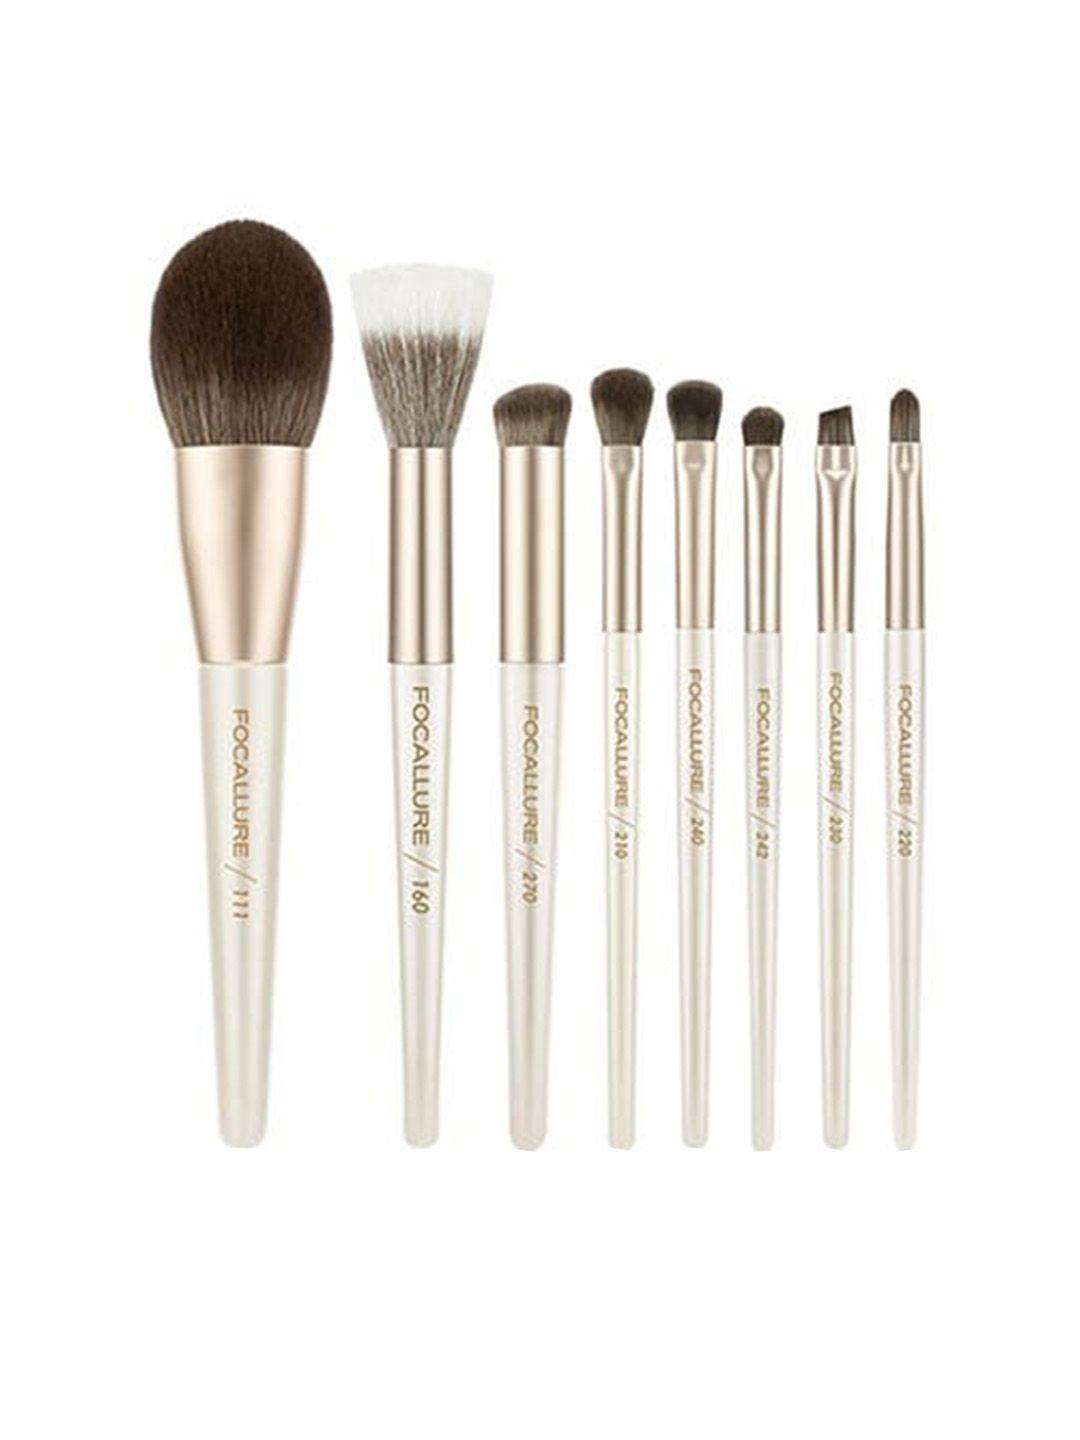 focallure set of 3 gold-toned makeup brushes